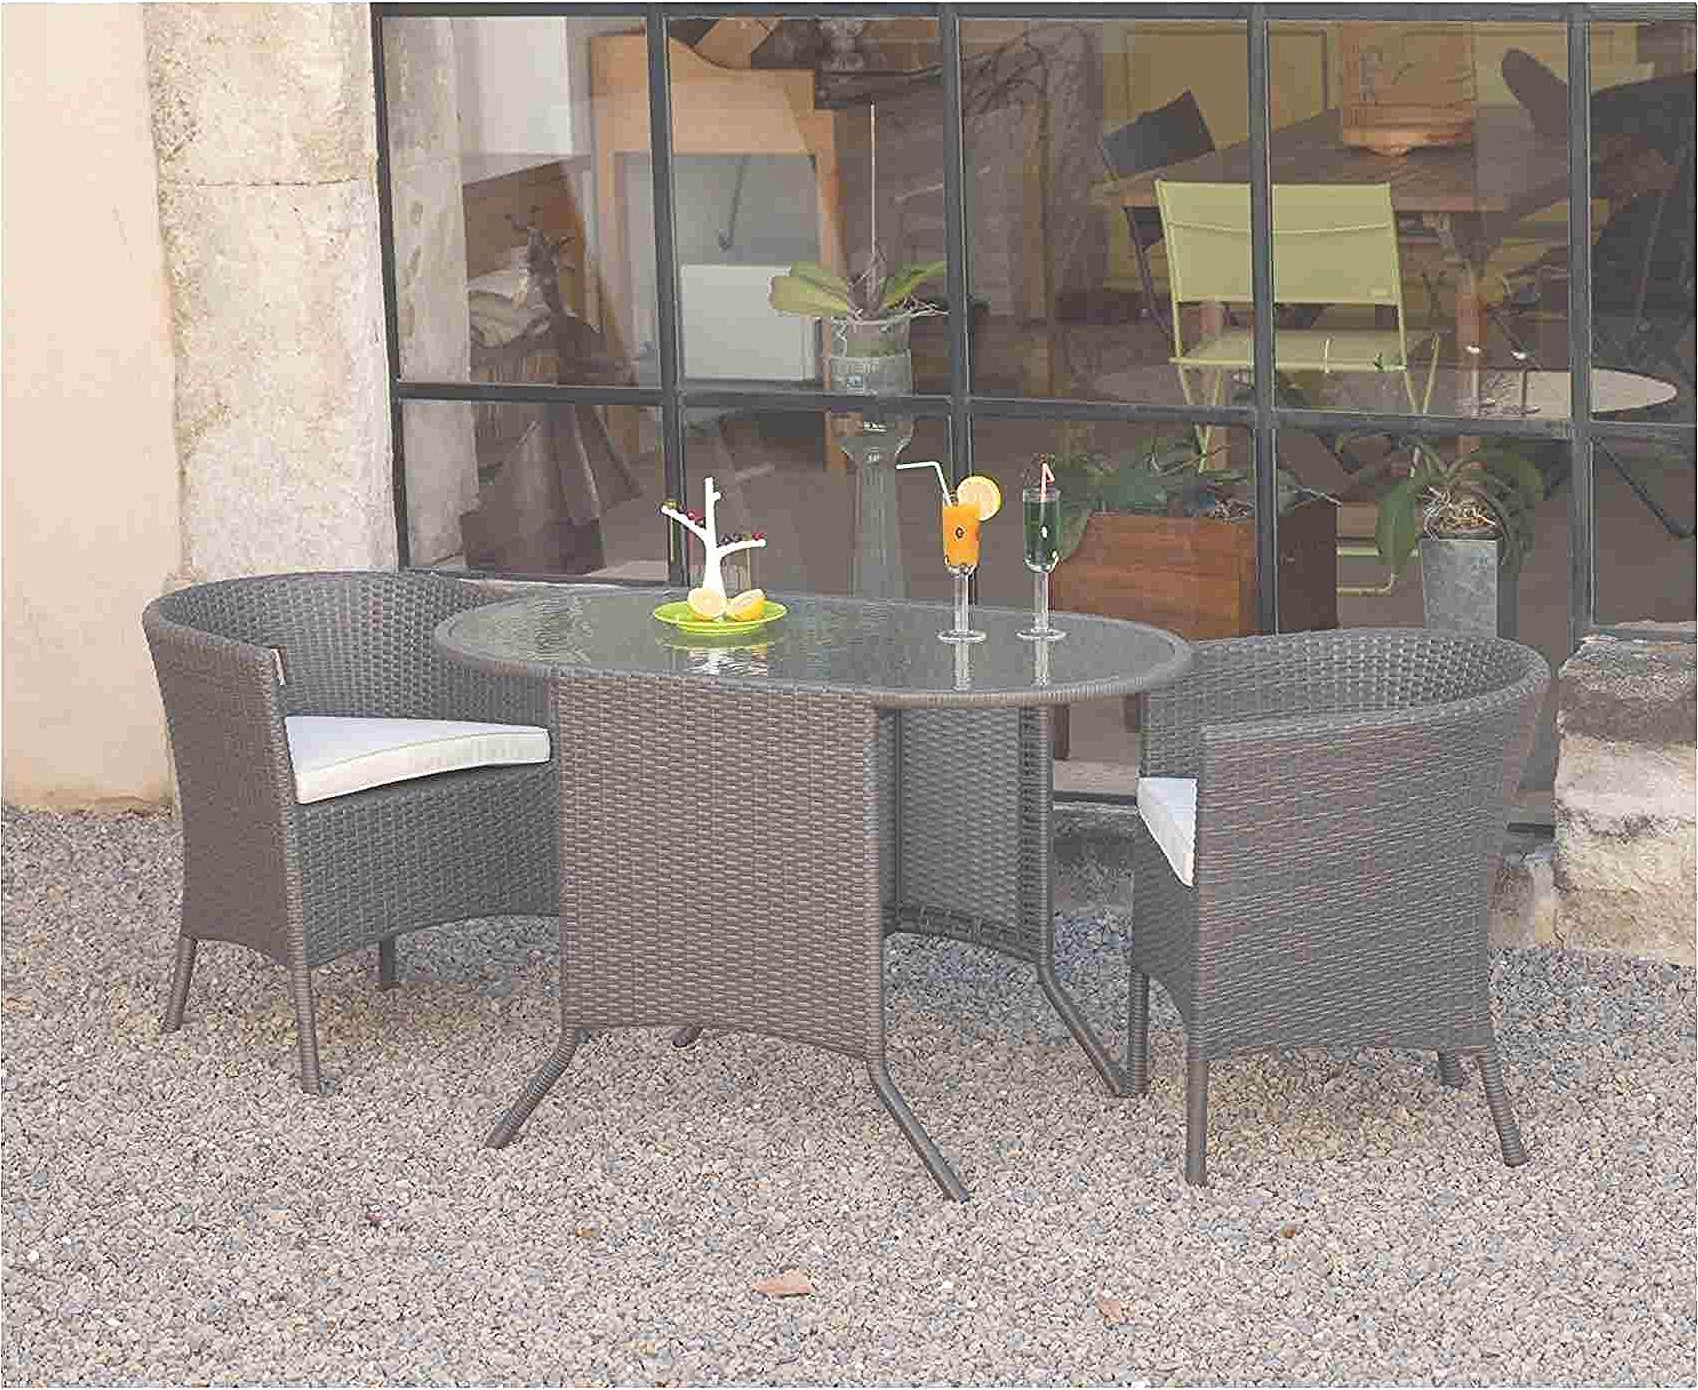 79 Glamorous Mobilier Jardin Leclerc Outdoor Furniture A